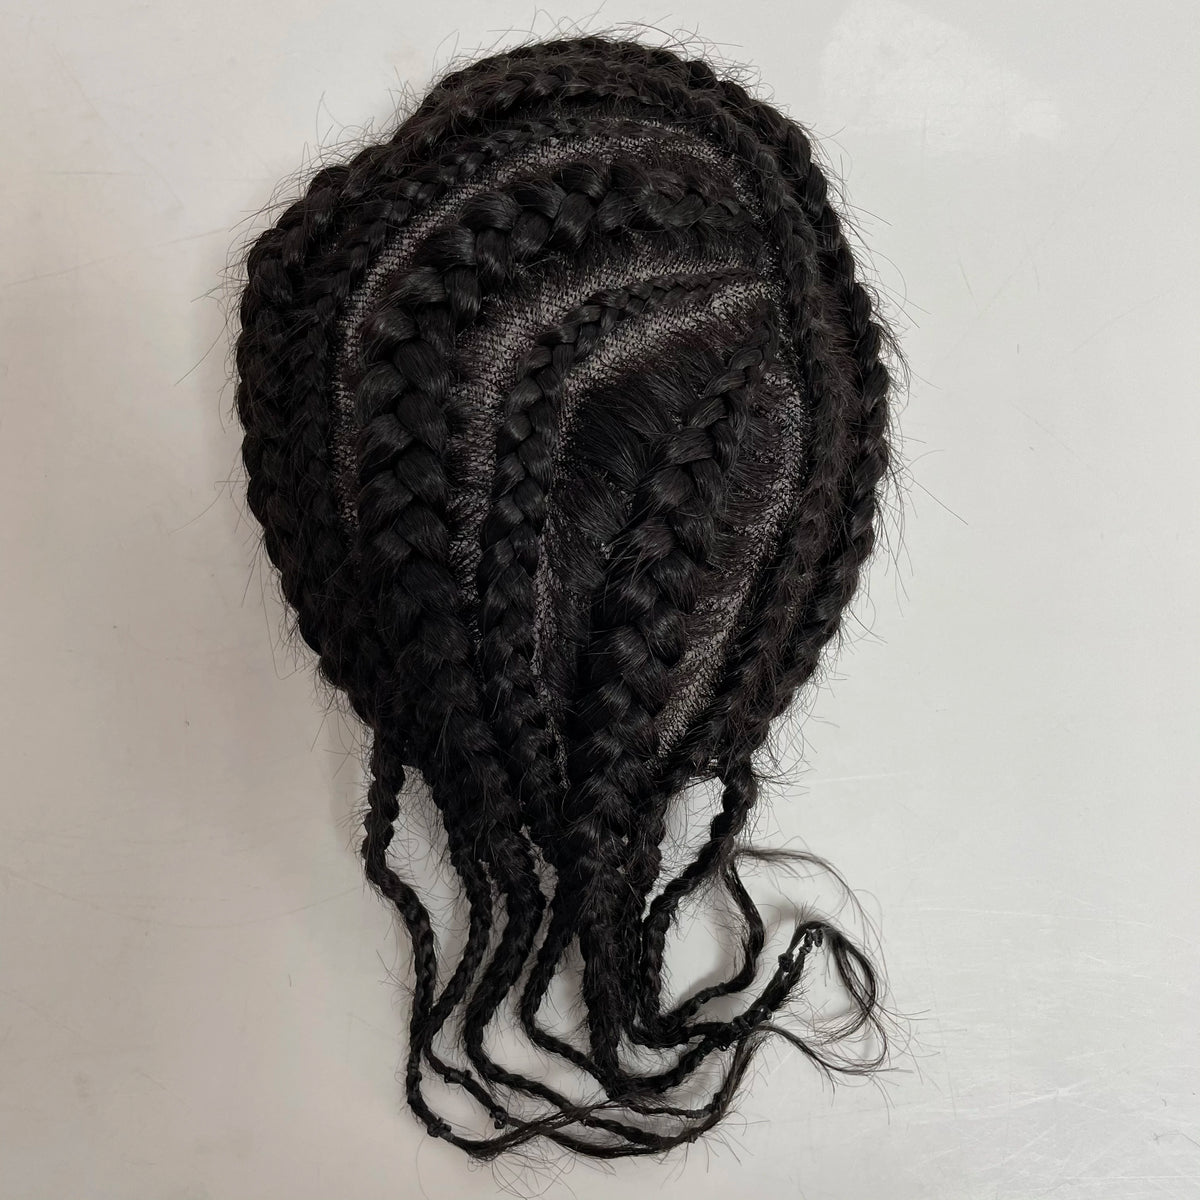 Human Hair System Lace with PU Braids Toupee for Black Men